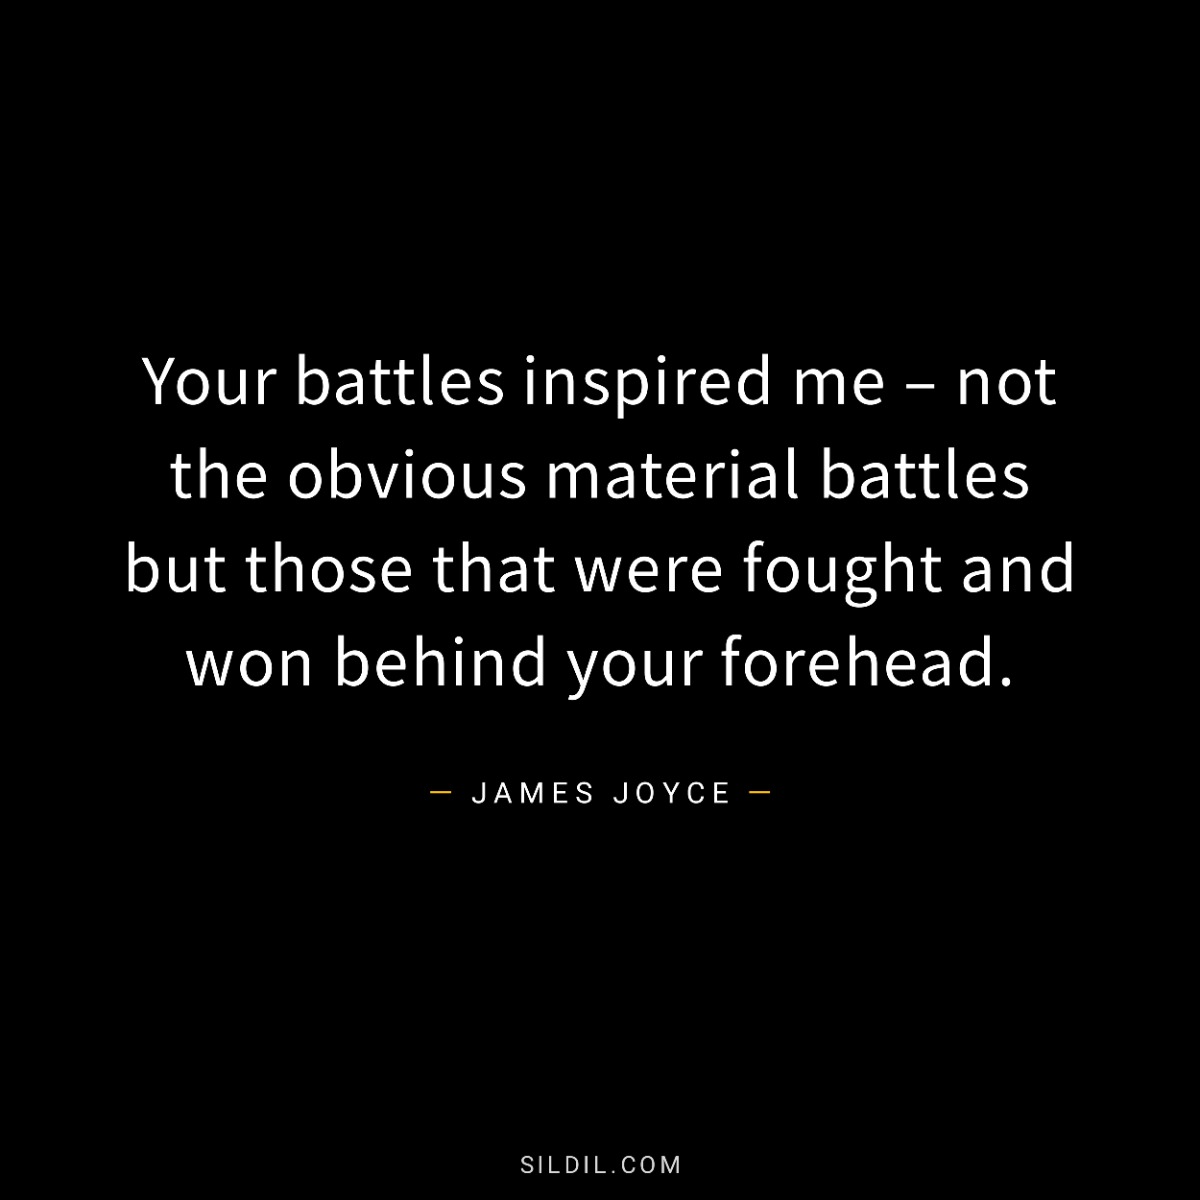 Your battles inspired me – not the obvious material battles but those that were fought and won behind your forehead.